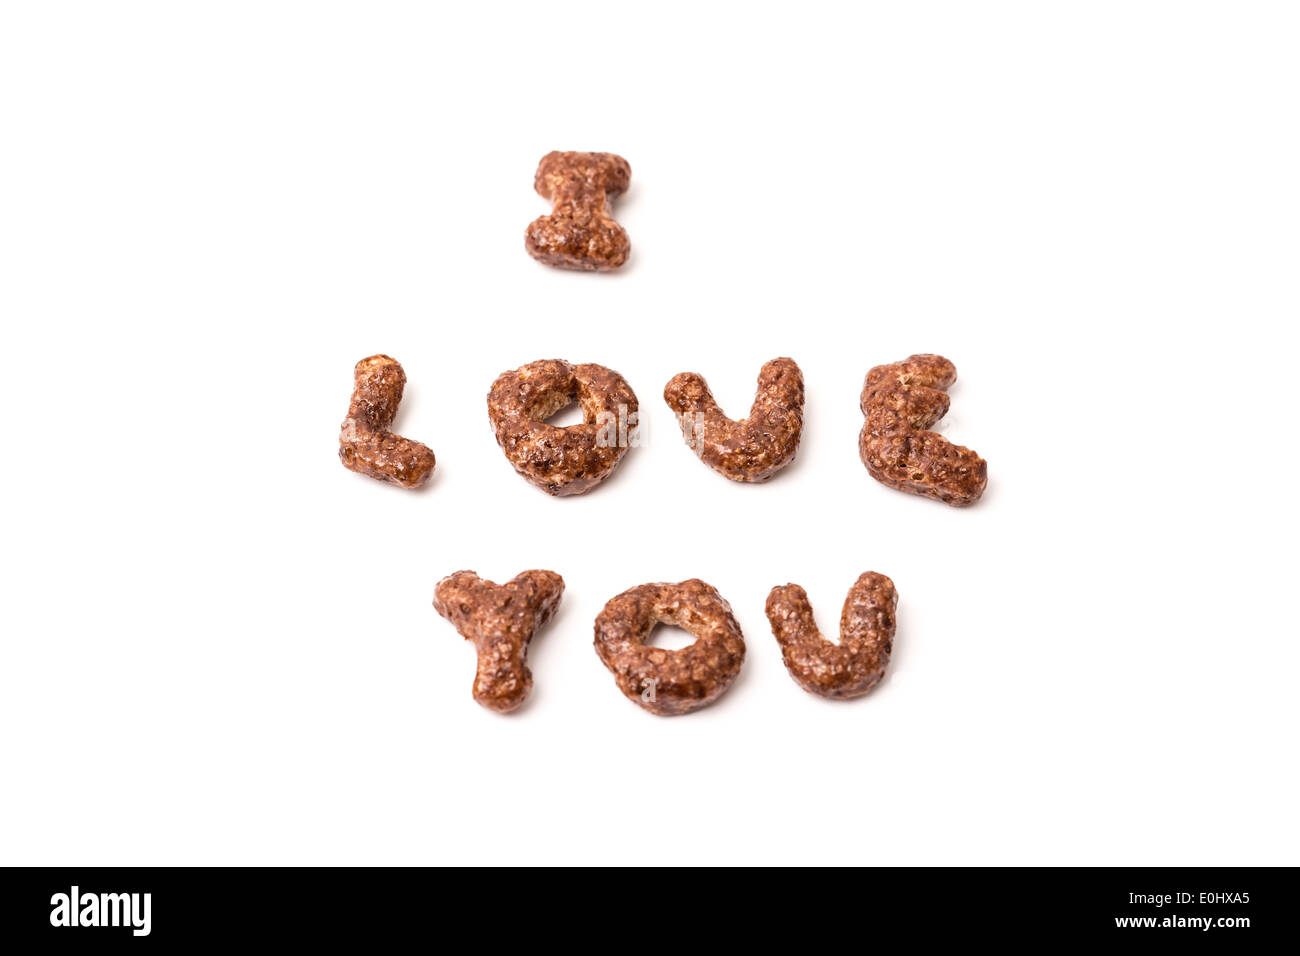 I love you. Heap of edible letters 13996093 Stock Photo at Vecteezy